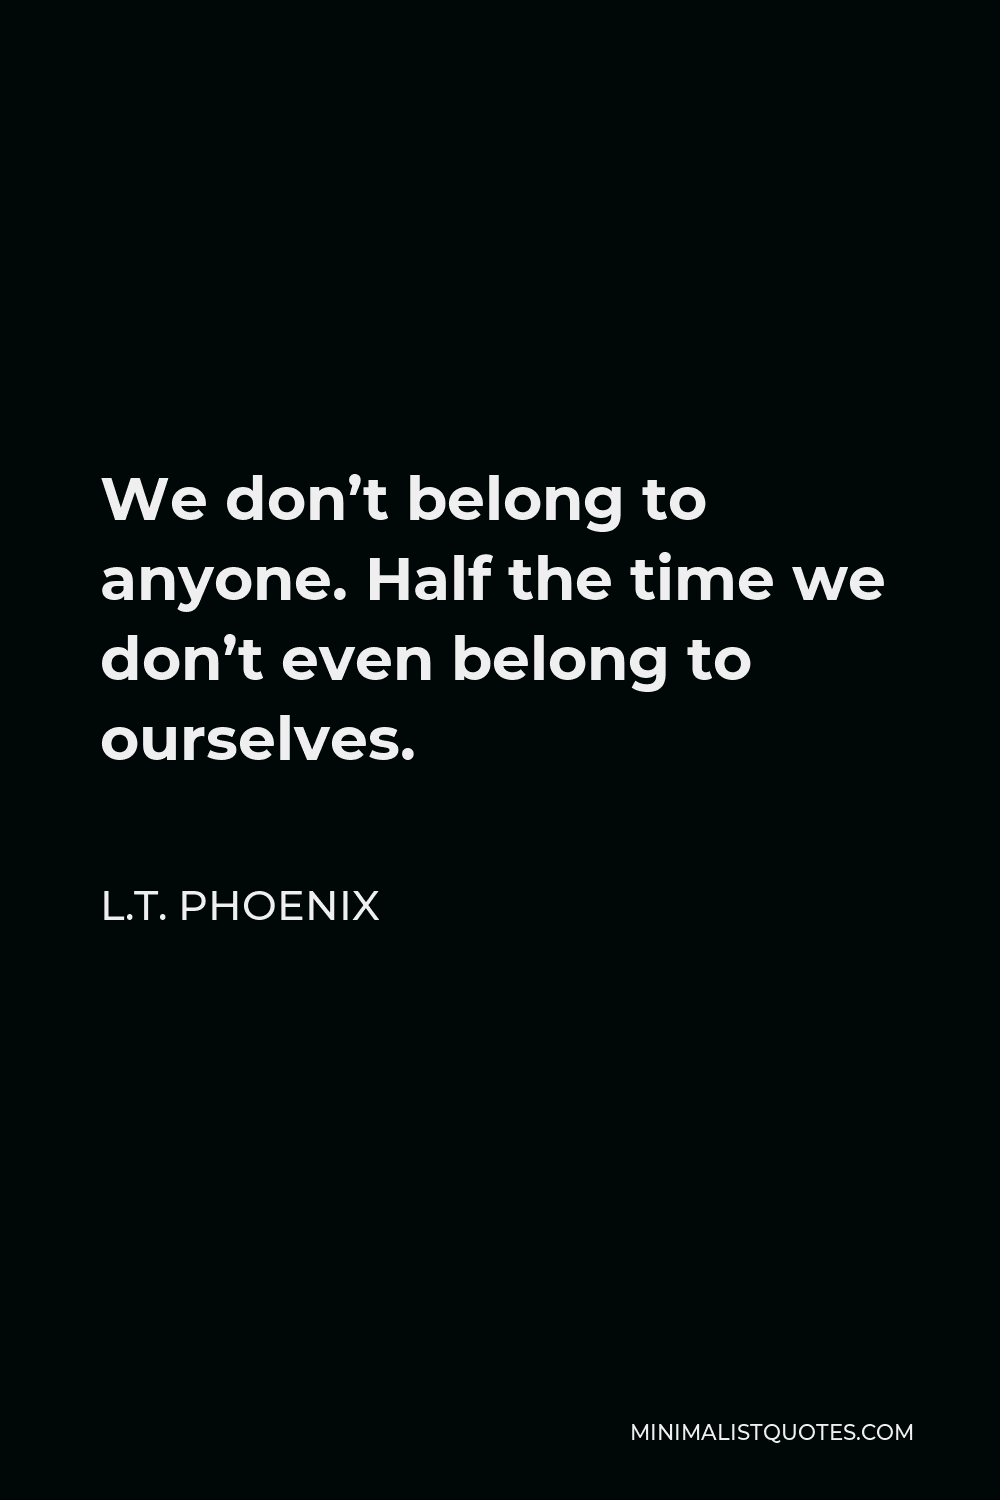 L.T. Phoenix Quote - We don’t belong to anyone. Half the time we don’t even belong to ourselves.